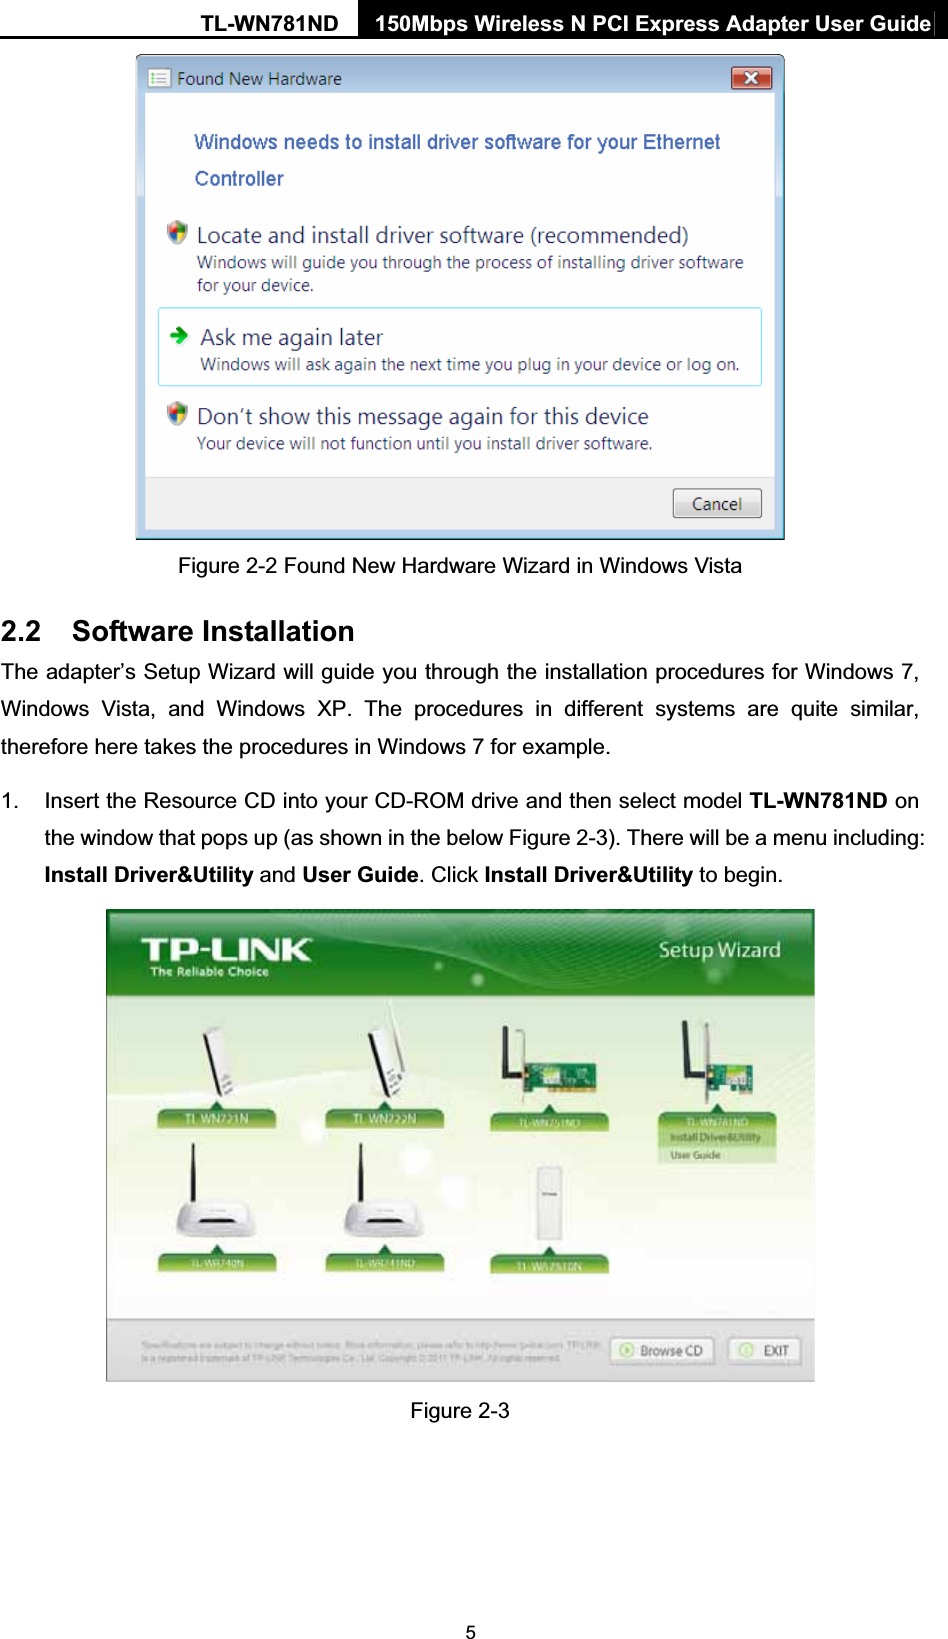 TL-WN781ND  150Mbps Wireless N PCI Express Adapter User Guide  5 Figure 2-2 Found New Hardware Wizard in Windows Vista 2.2 Software Installation The adapter’s Setup Wizard will guide you through the installation procedures for Windows 7, Windows Vista, and Windows XP. The procedures in different systems are quite similar, therefore here takes the procedures in Windows 7 for example.   1.  Insert the Resource CD into your CD-ROM drive and then select model TL-WN781ND on the window that pops up (as shown in the below Figure 2-3). There will be a menu including: Install Driver&amp;Utility and User Guide. Click Install Driver&amp;Utility to begin.   Figure 2-3 